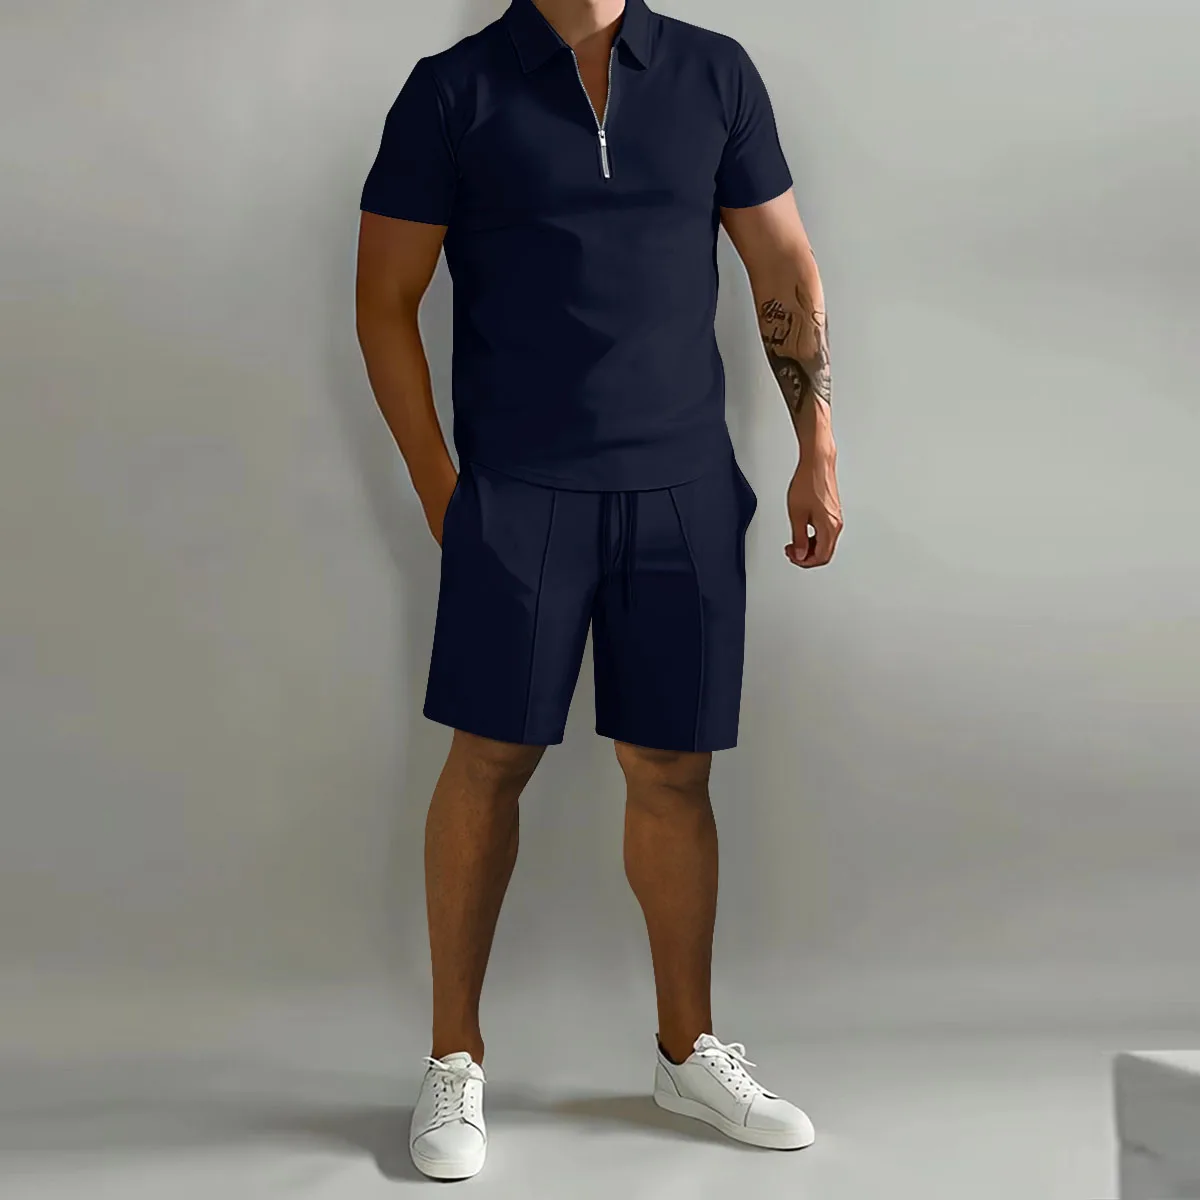 Summer short sleeve Thin Polo Shirt+Sport Shorts 2 Piece New Mens Tracksuit Suit Men Solid Set Casual Jogging Sportswear images - 6